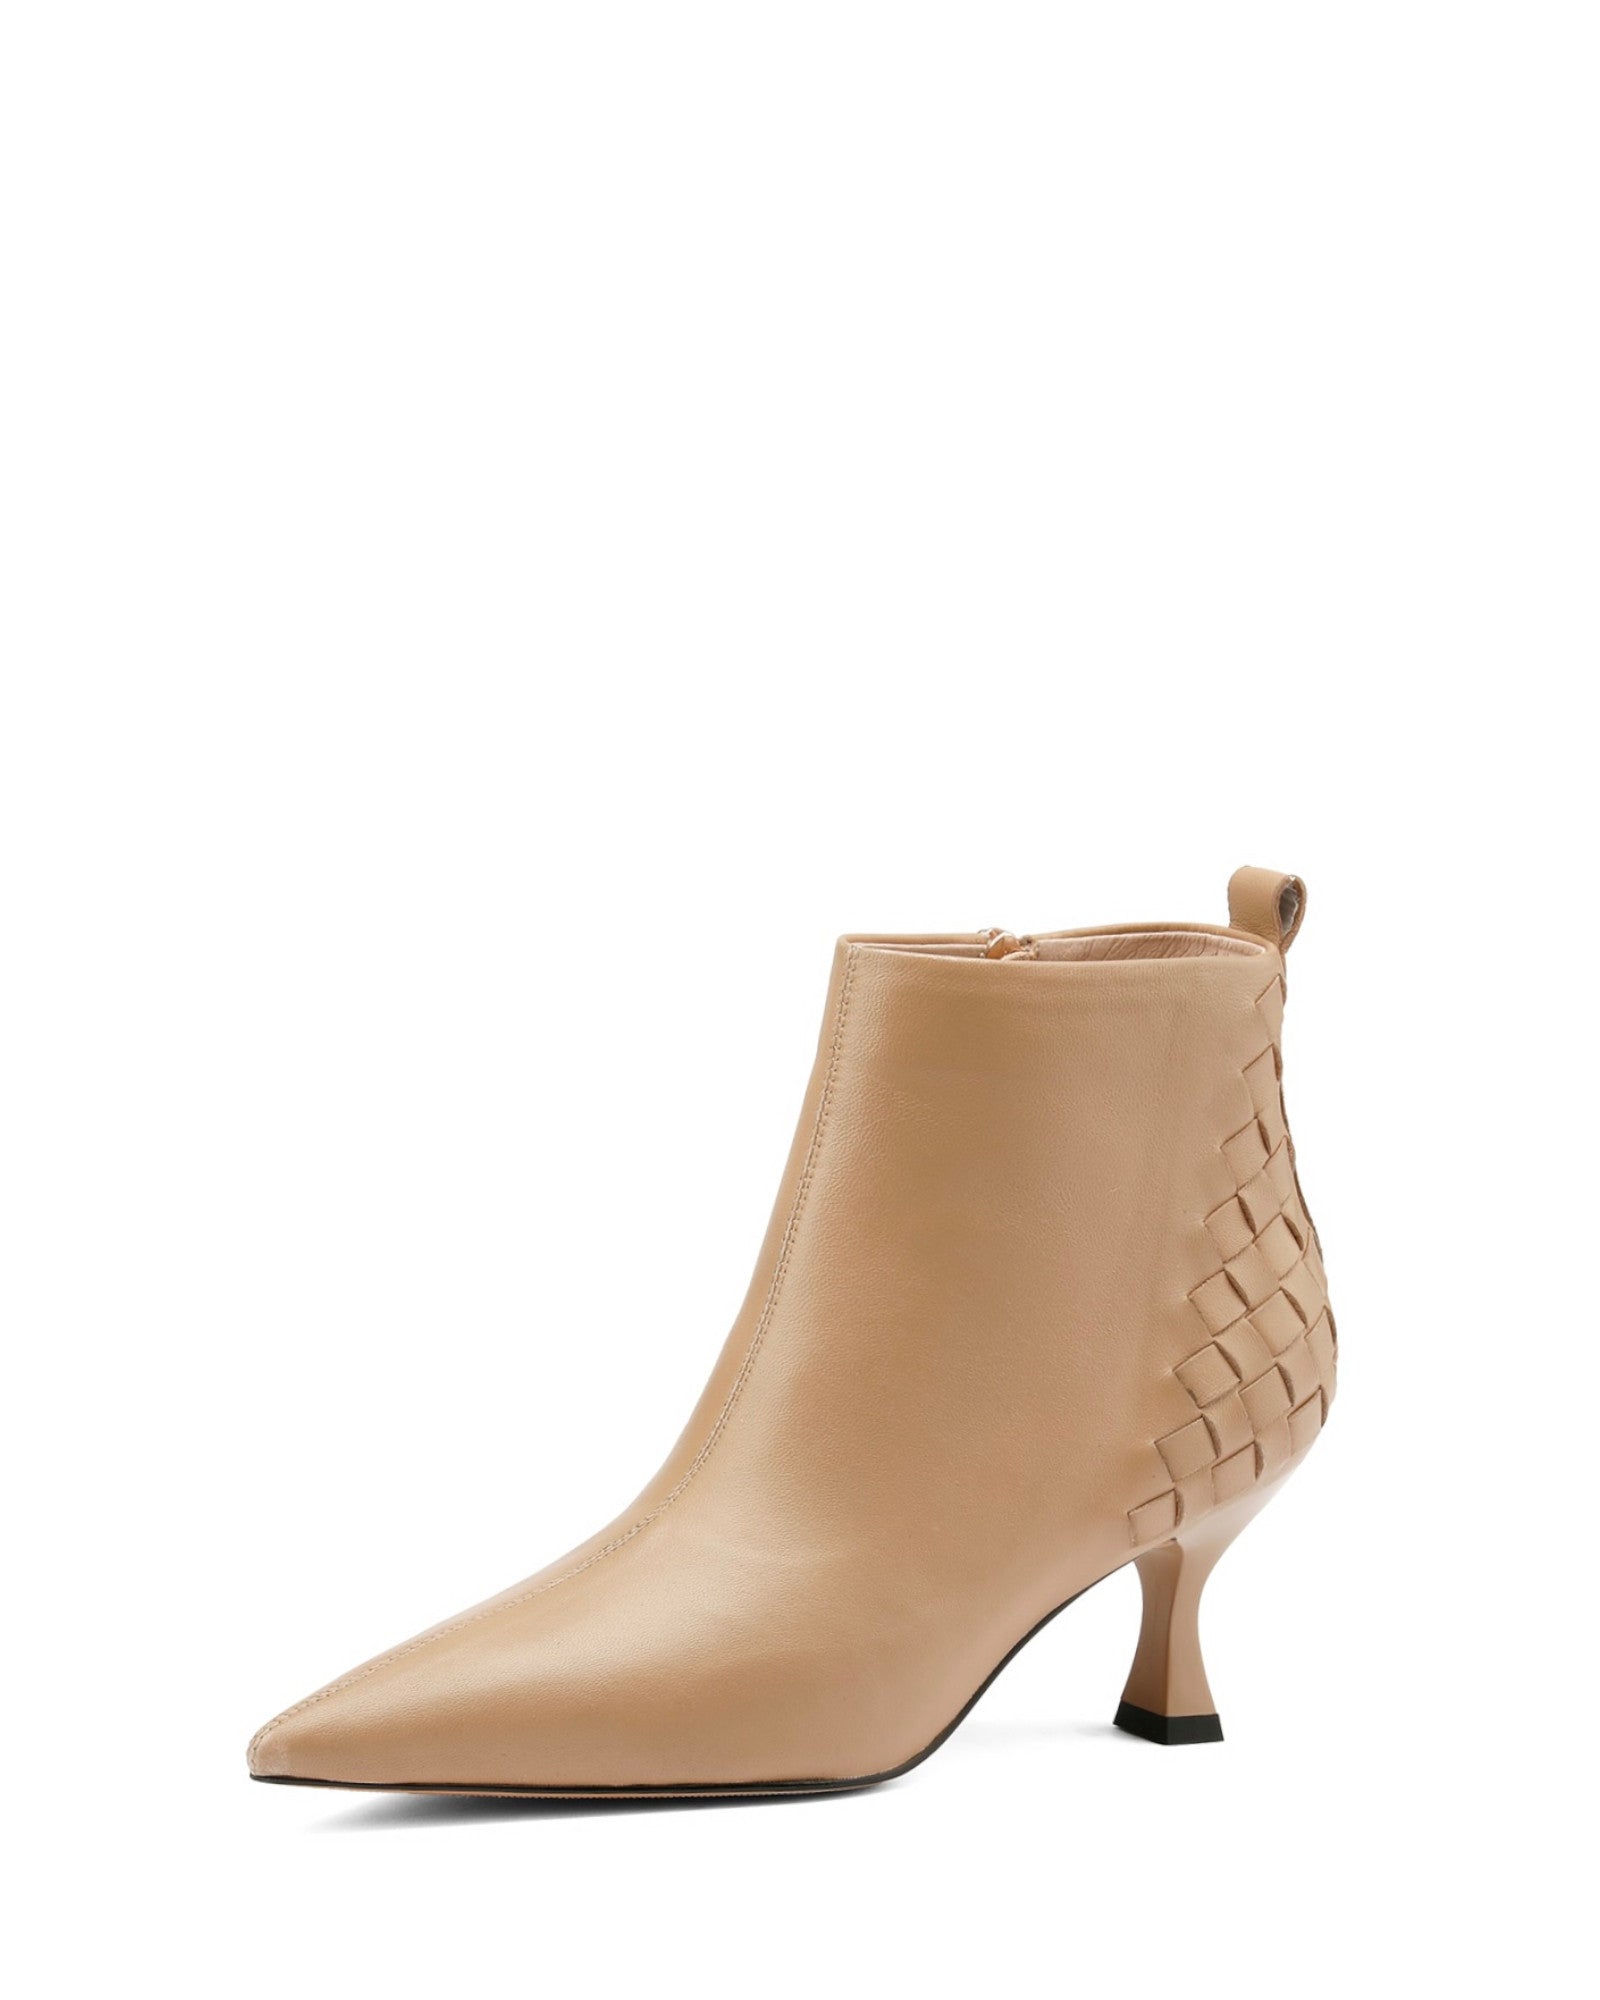 panay-woven-boots-nude